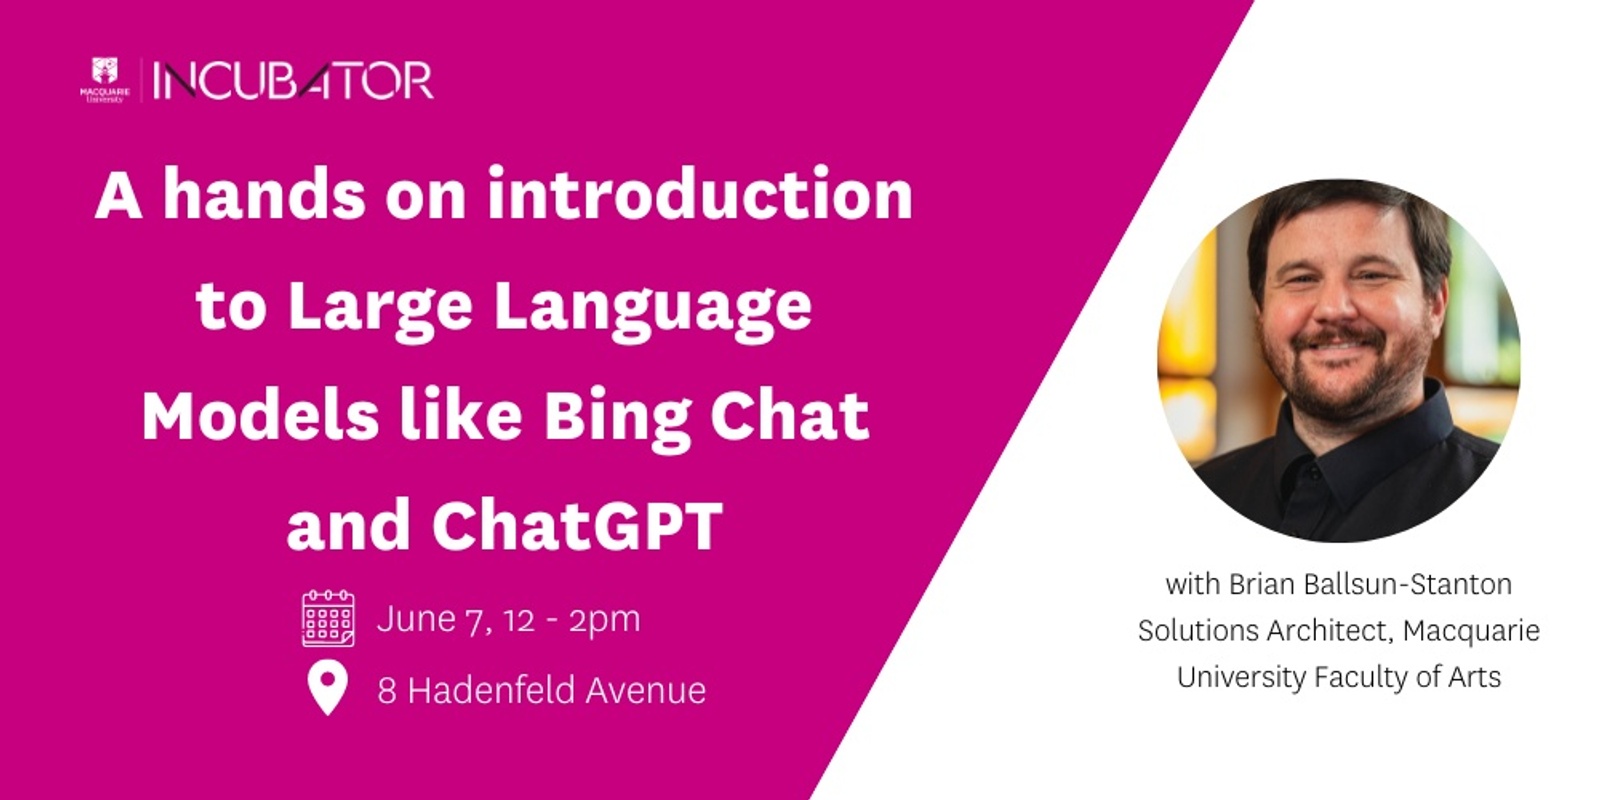 Banner image for A hands on introduction to Large Language Models like Bing Chat and ChatGPT